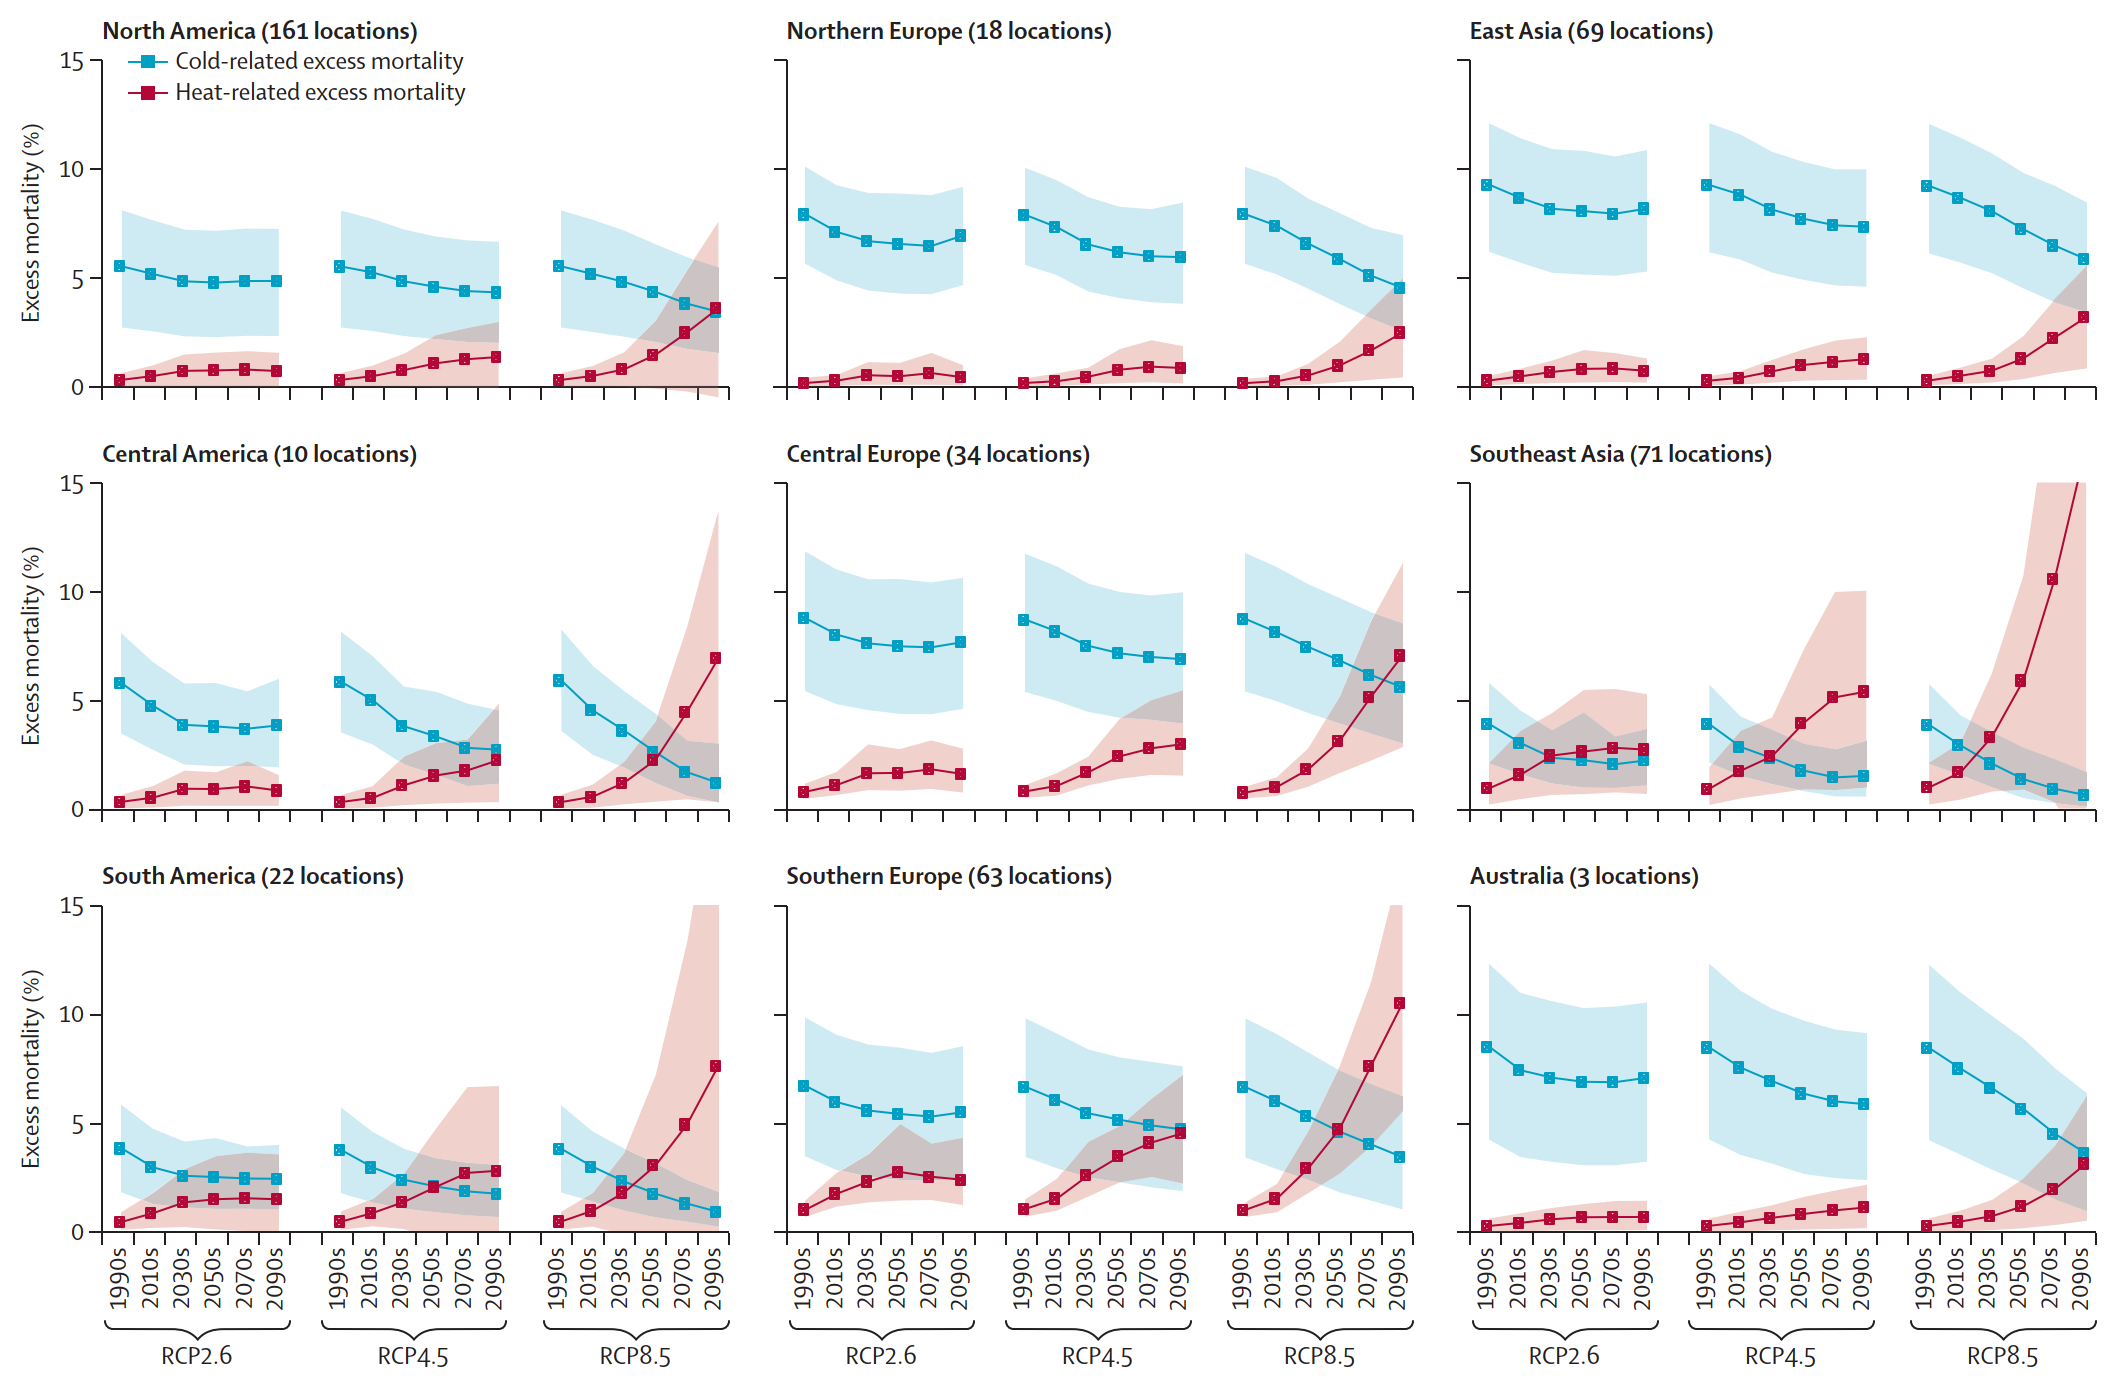 9 graphs showing projections of cold- and heat-related mortality in different regions